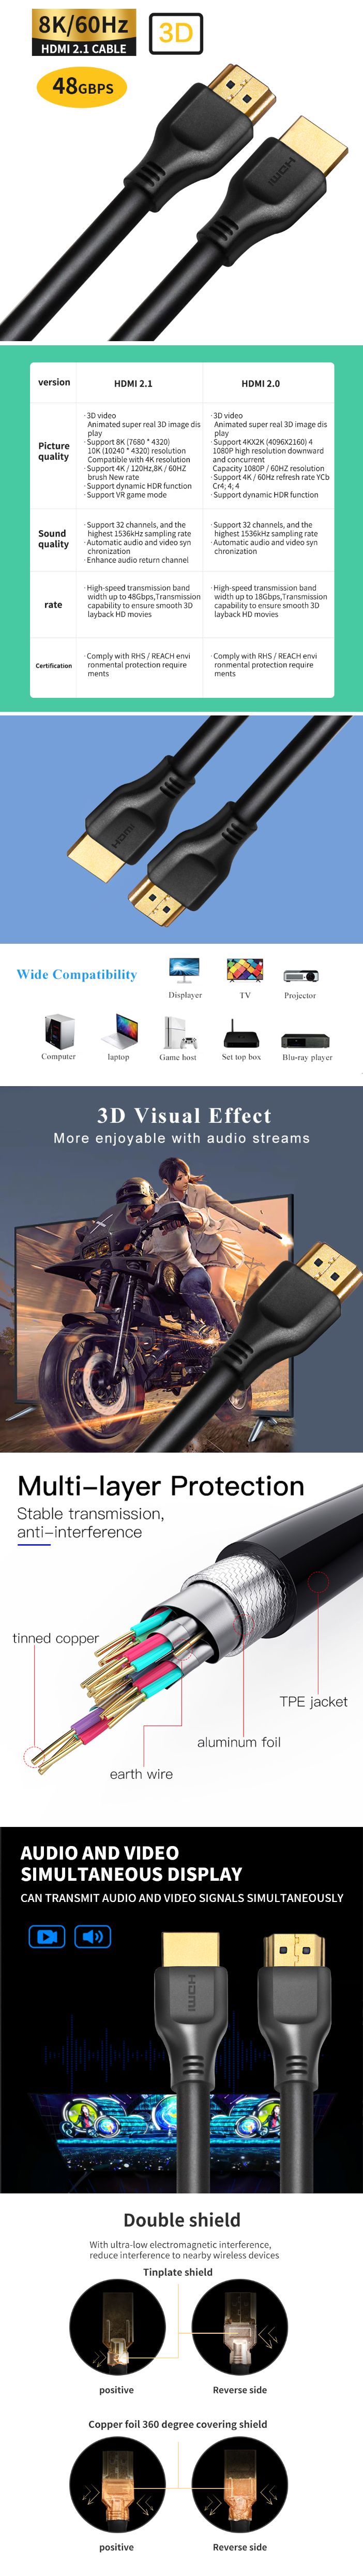 8K HDMI Cable, 8K TV HDMI Cable, 8K HDMI to HDMI Cable, HDMI2.1 Cable, 3D Video HDMI Cable, 4K HDMI Cable, HD Video Cable,